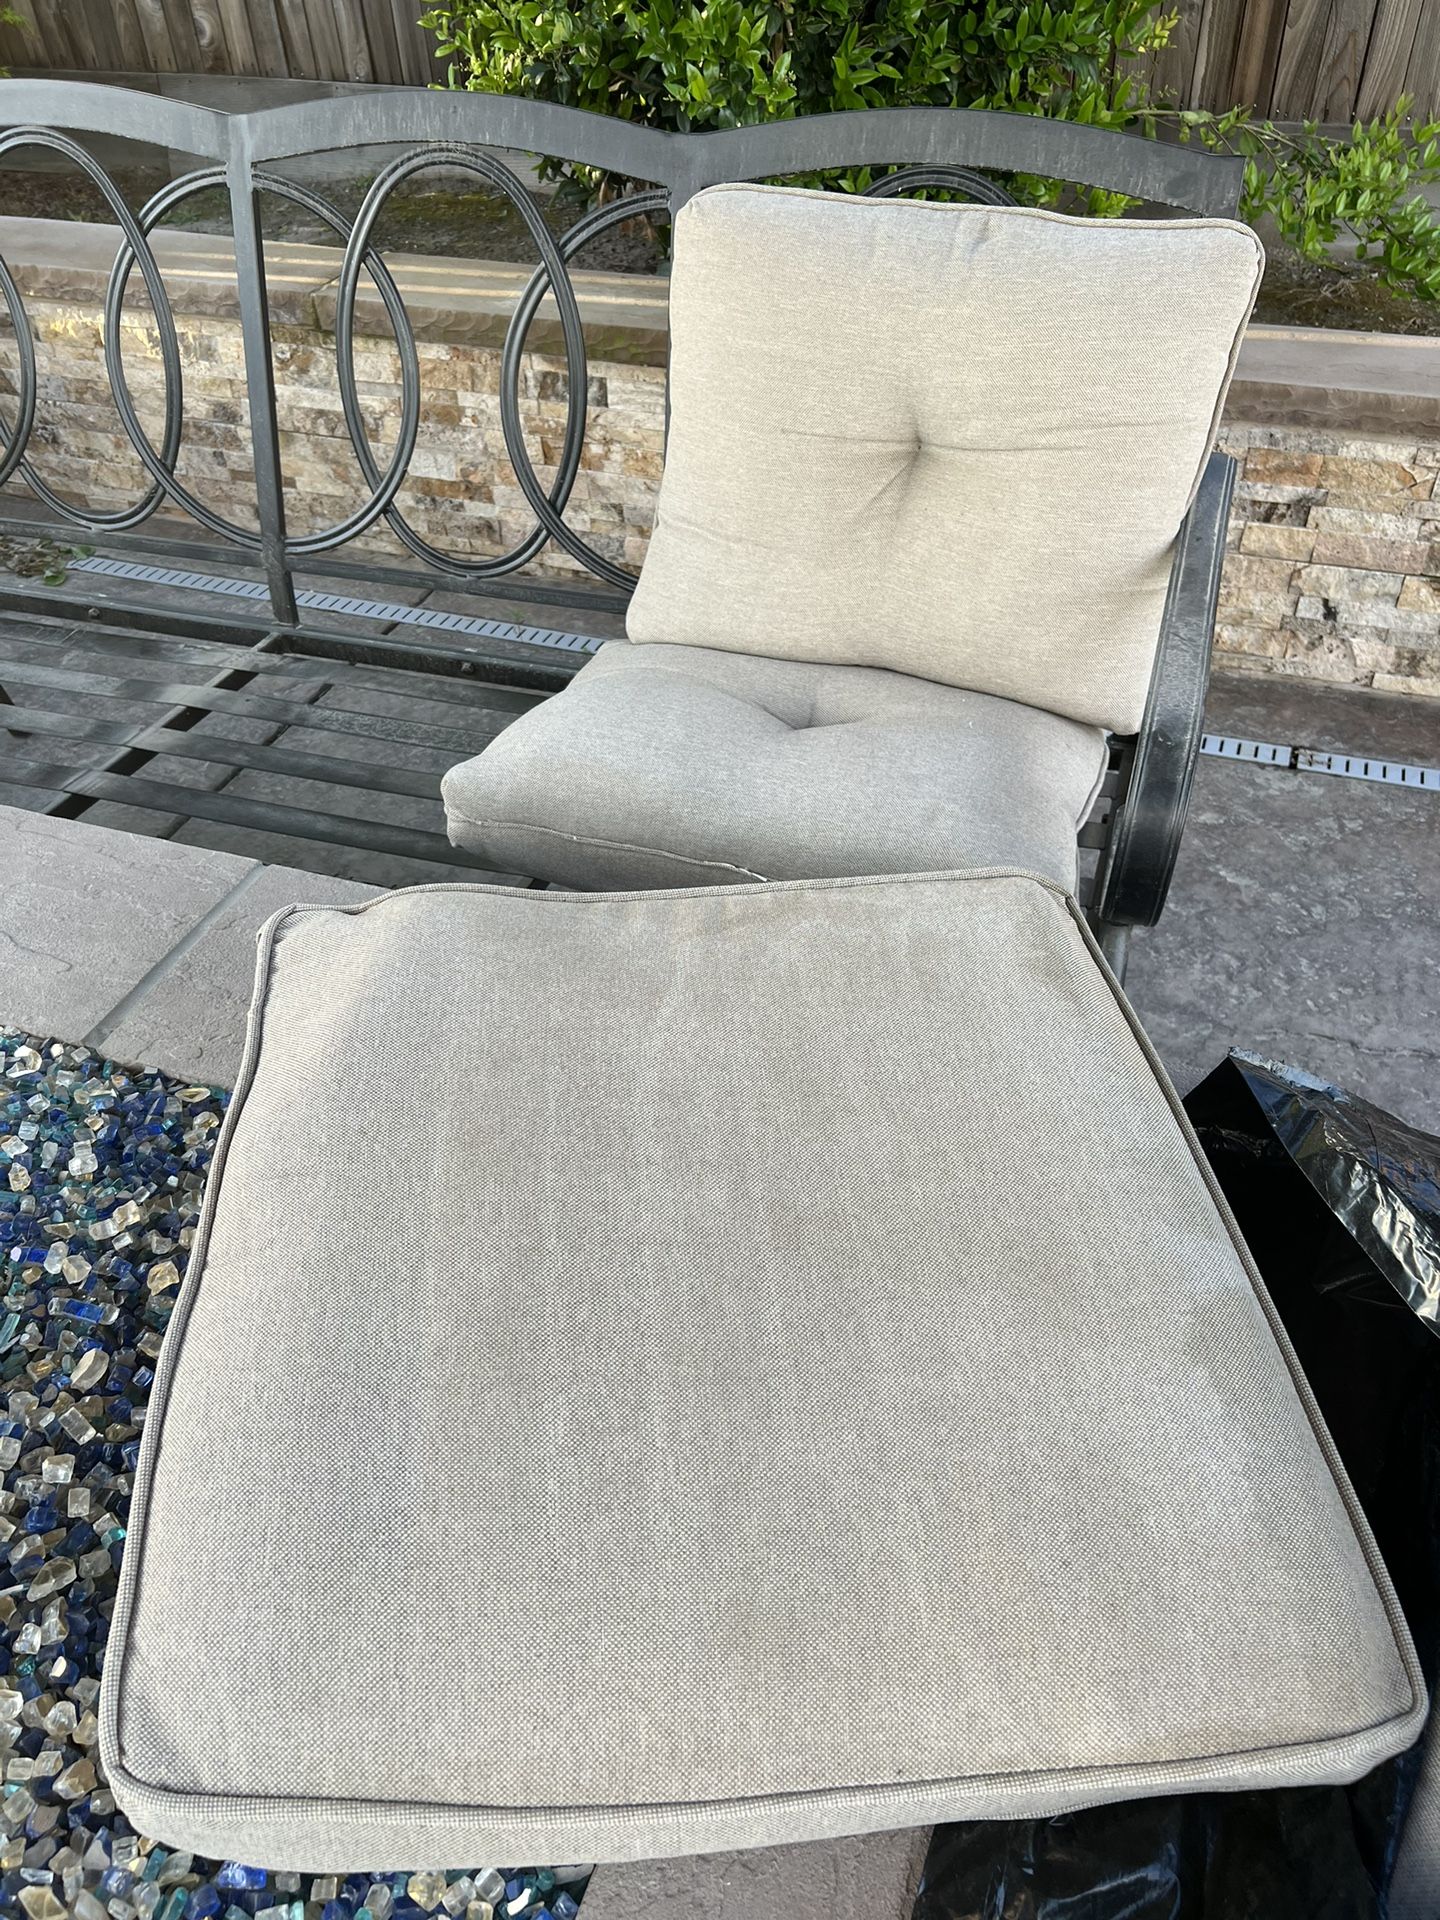 Patio Furniture Cushions for 16 Seats